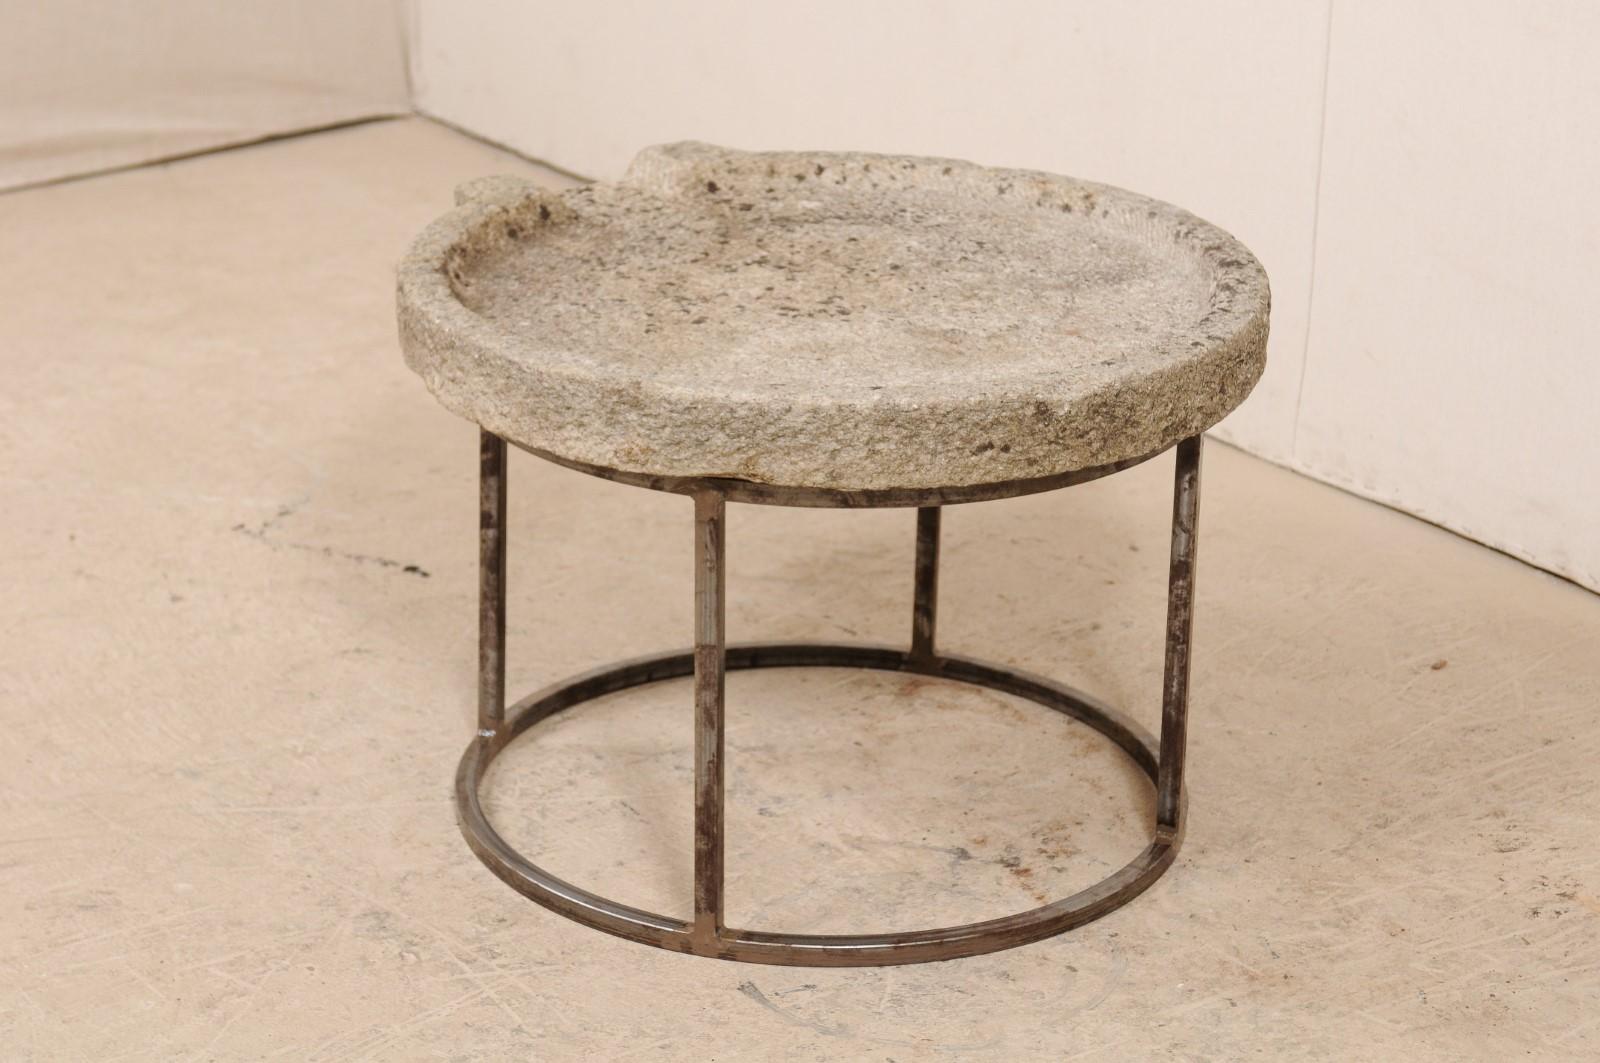 A 19th century Mediterranean stone trough table on custom base. This unique coffee table has been fashioned from a 19th century stone trough, once used in the production to press olives into oil. The round-shaped stone has been carved of hand and